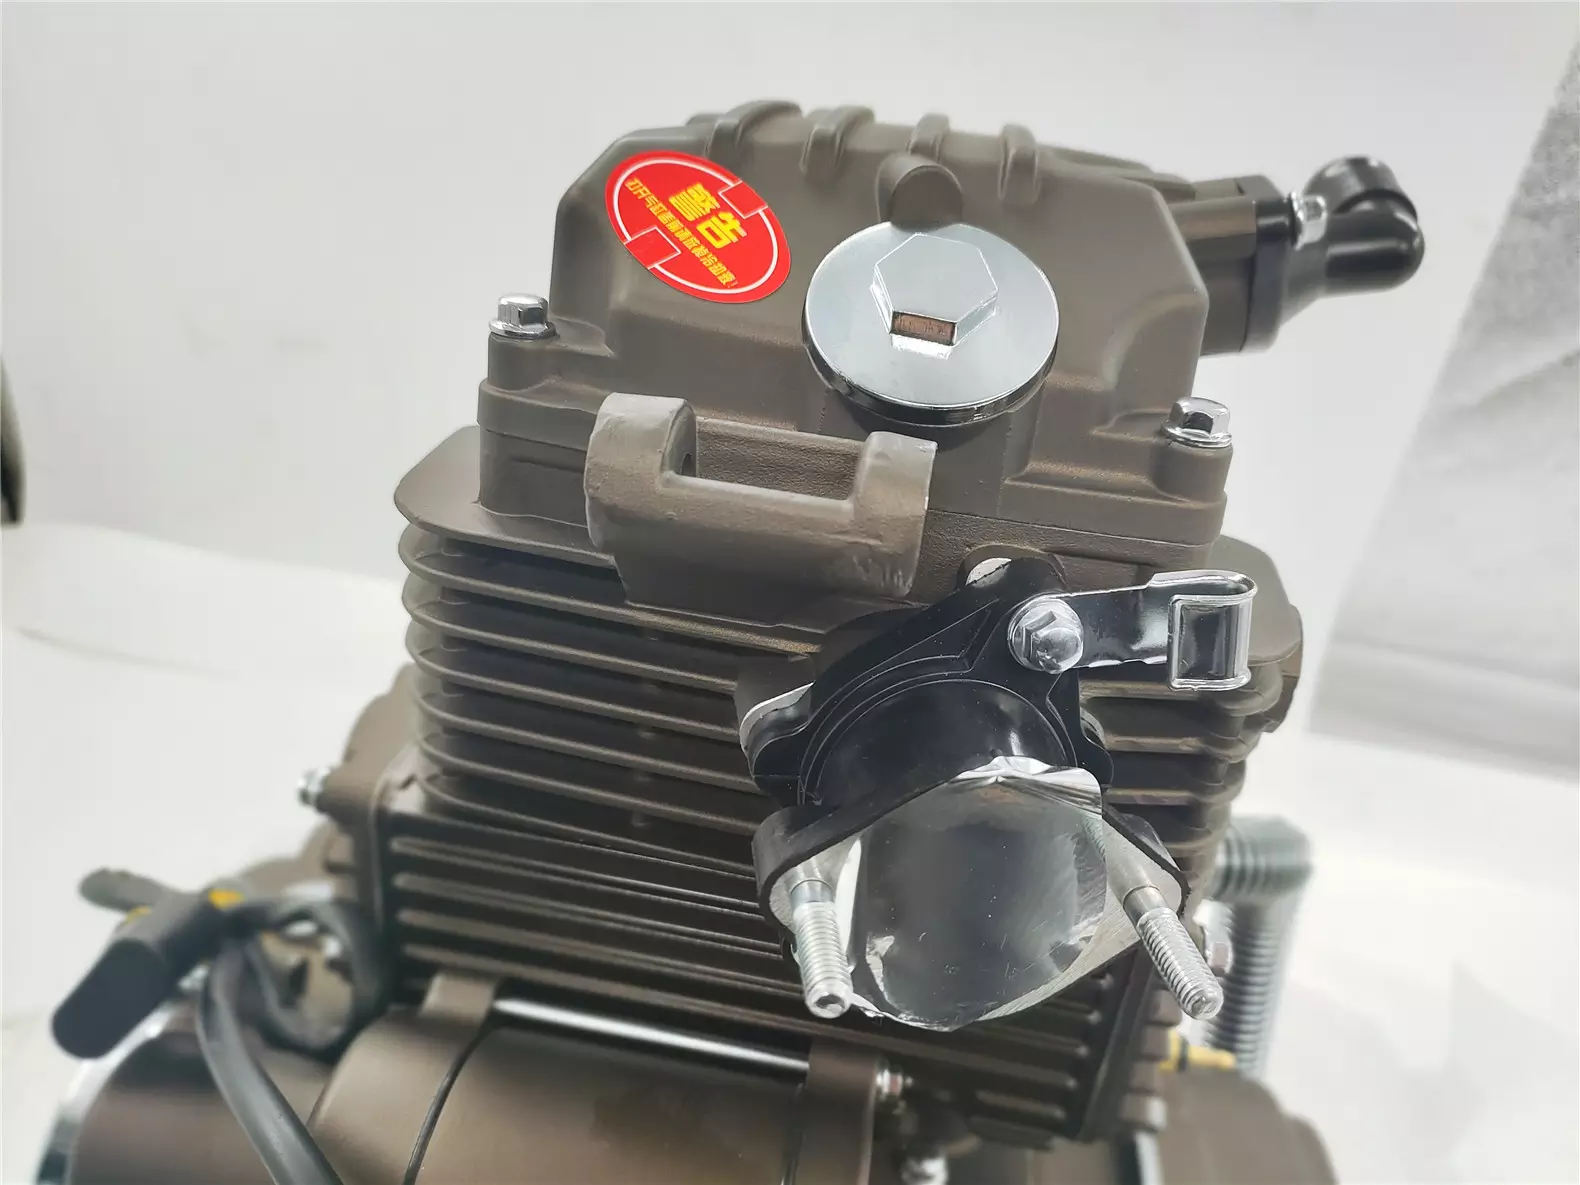 CG Cool 250cc DAYANG LIFAN  Motorcycle Engine Assembly Single Cylinder Four Stroke Style China  Origin Quality CCC